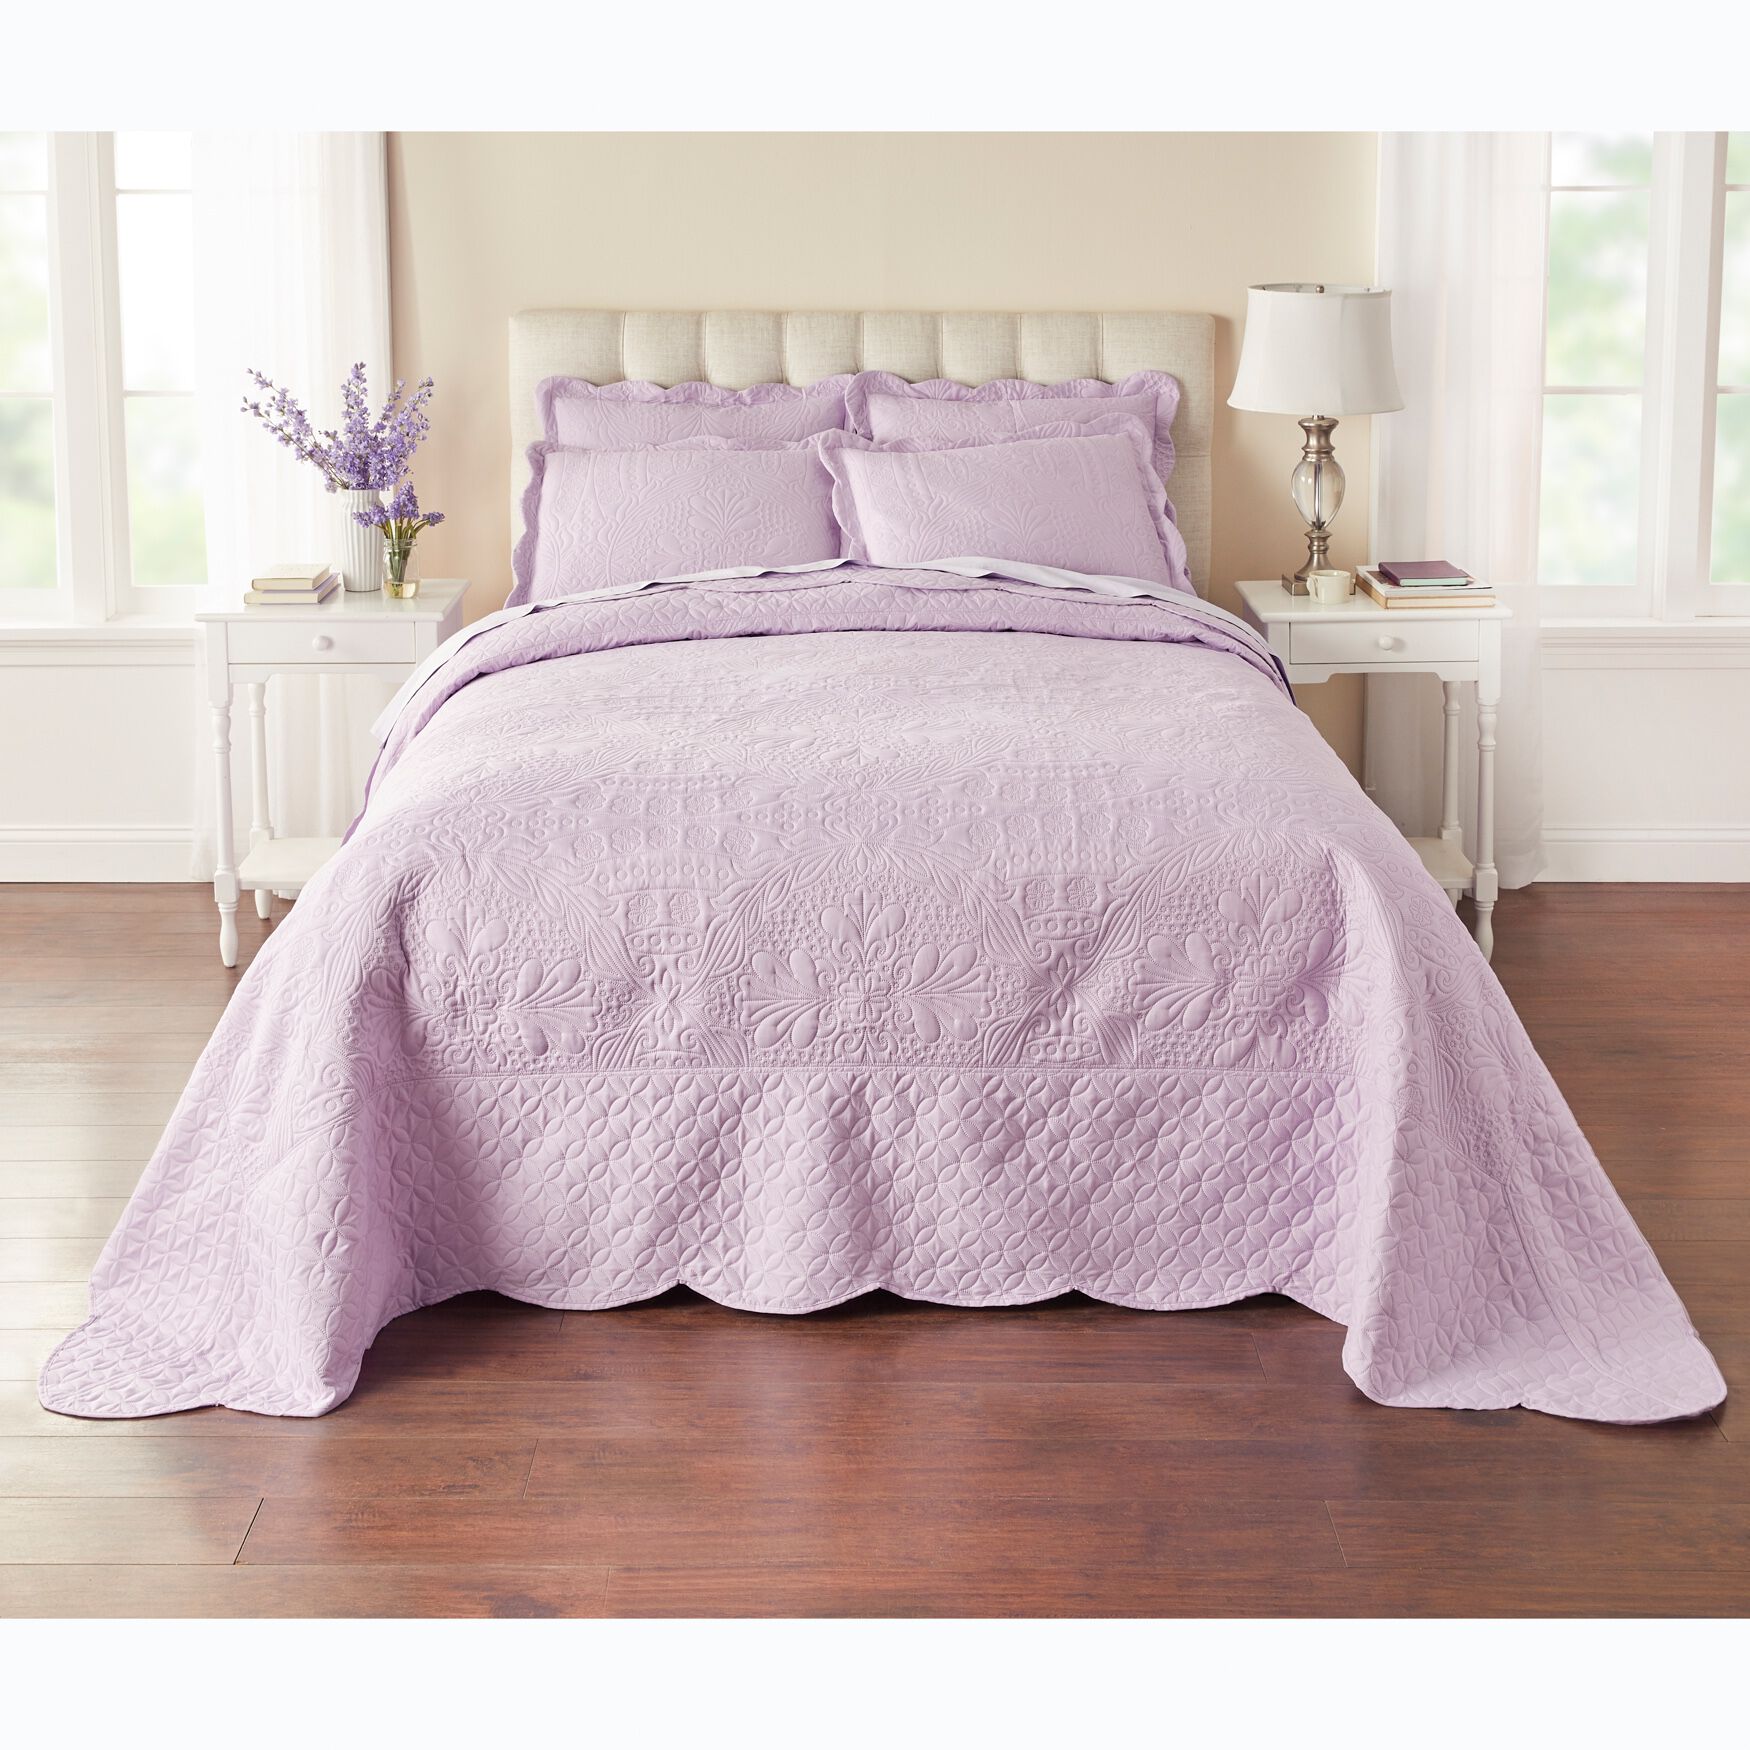 King Chocolate Collections Etc Elegant Ultra-Soft Faux Fur Plush Quilt Bedding with Scalloped Edges and Scroll and Lattice Patterns